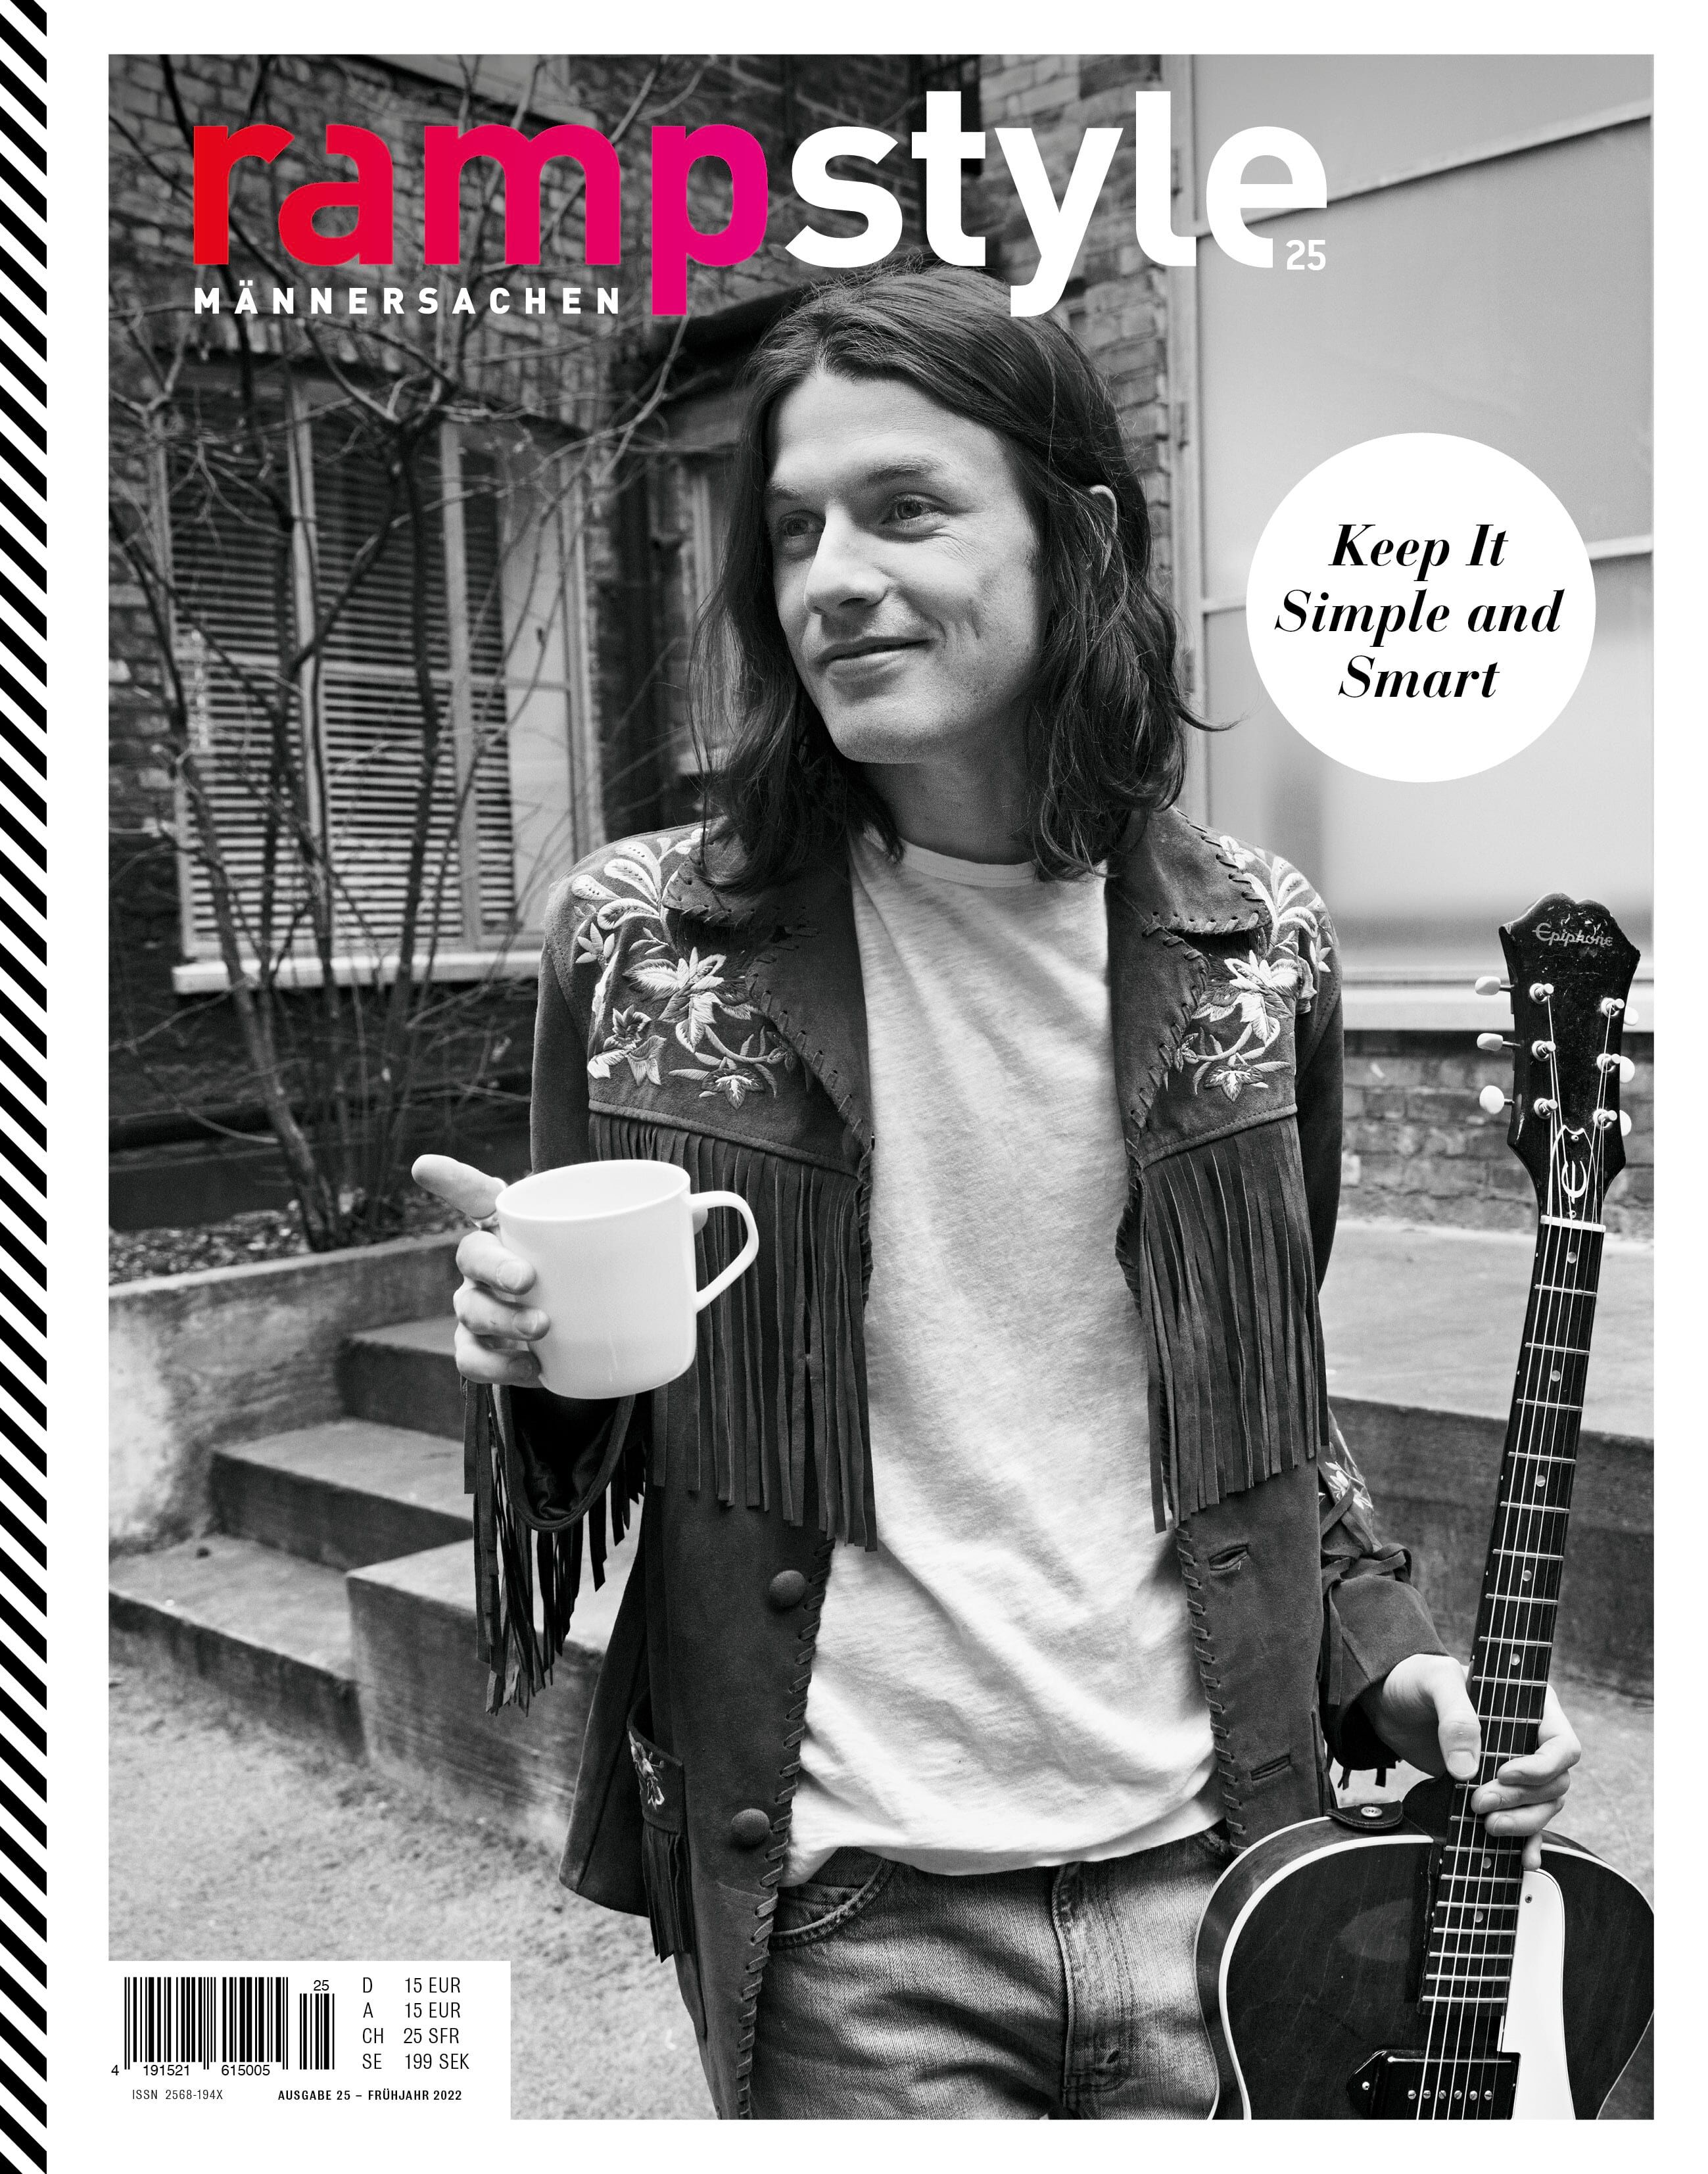 Exclusively for rampstyle #25: Bryan Adams photographs James Bay